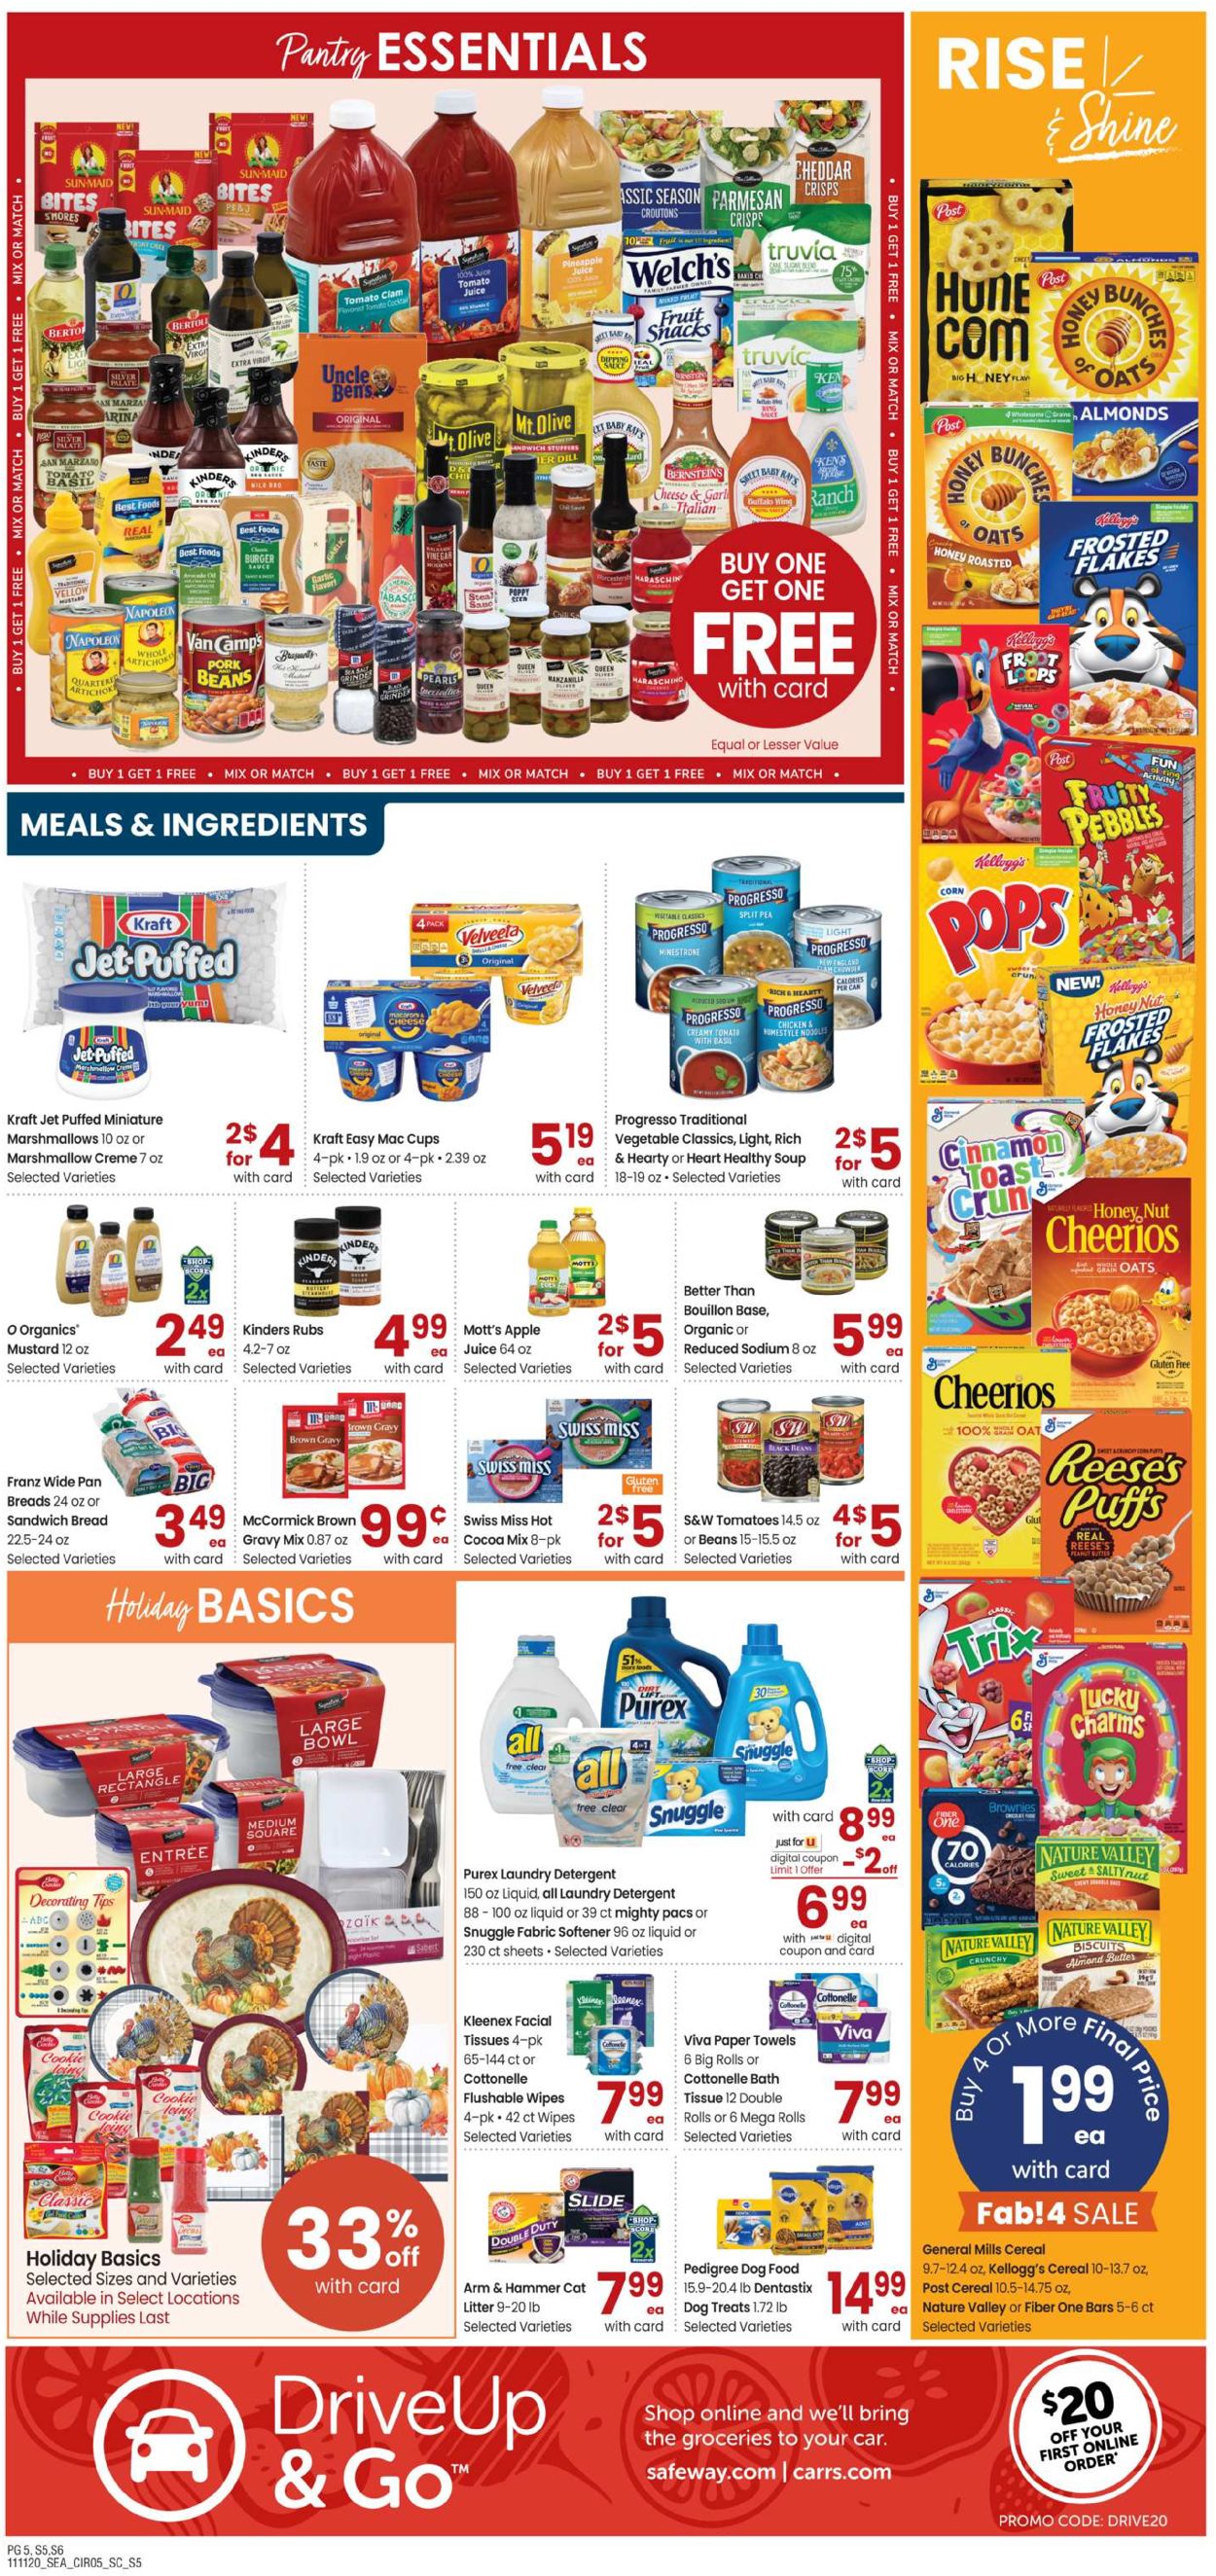 Carrs Current weekly ad 11/11 - 11/17/2020 [5] - frequent-ads.com